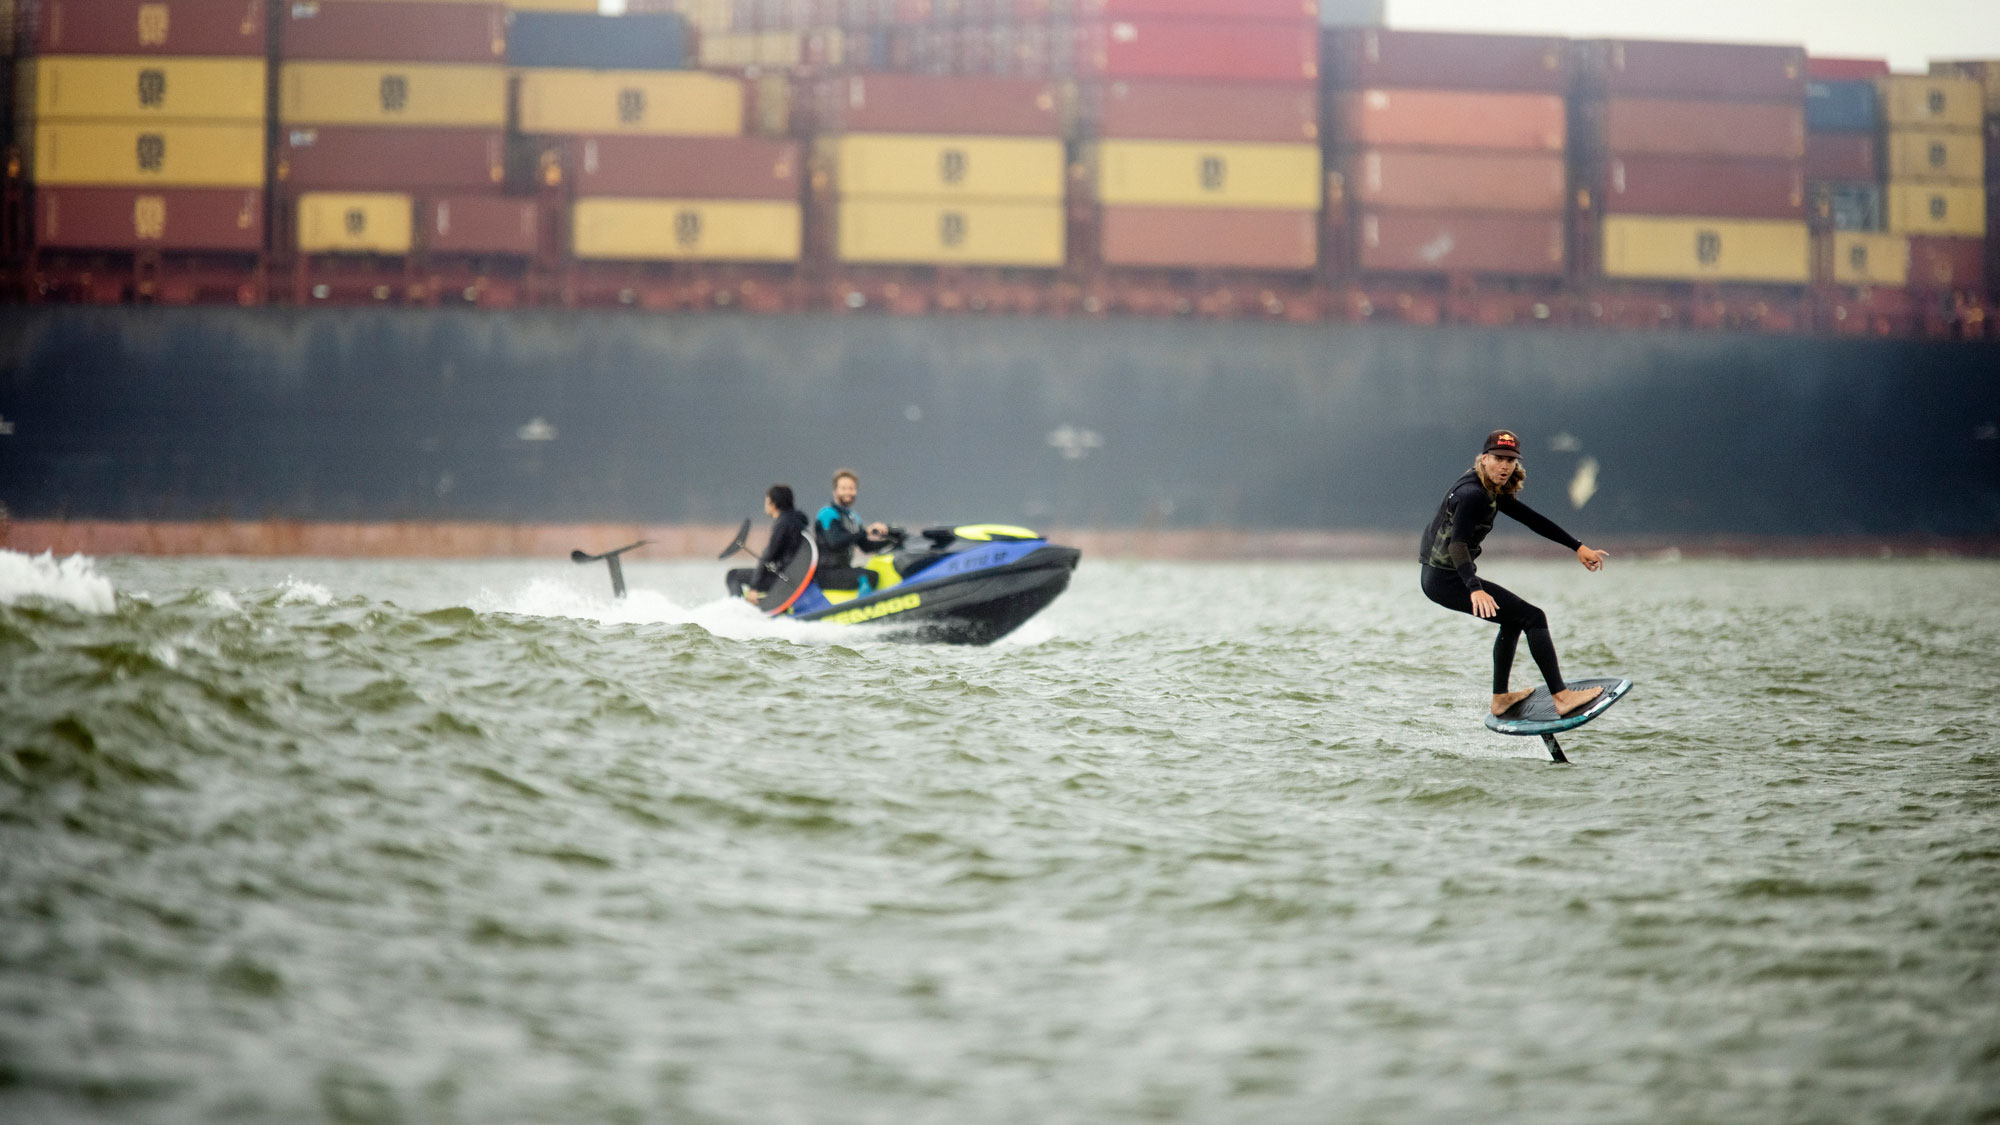 Nick Taylor and his crew catching waves in one of the world's busiest shipping waterways.